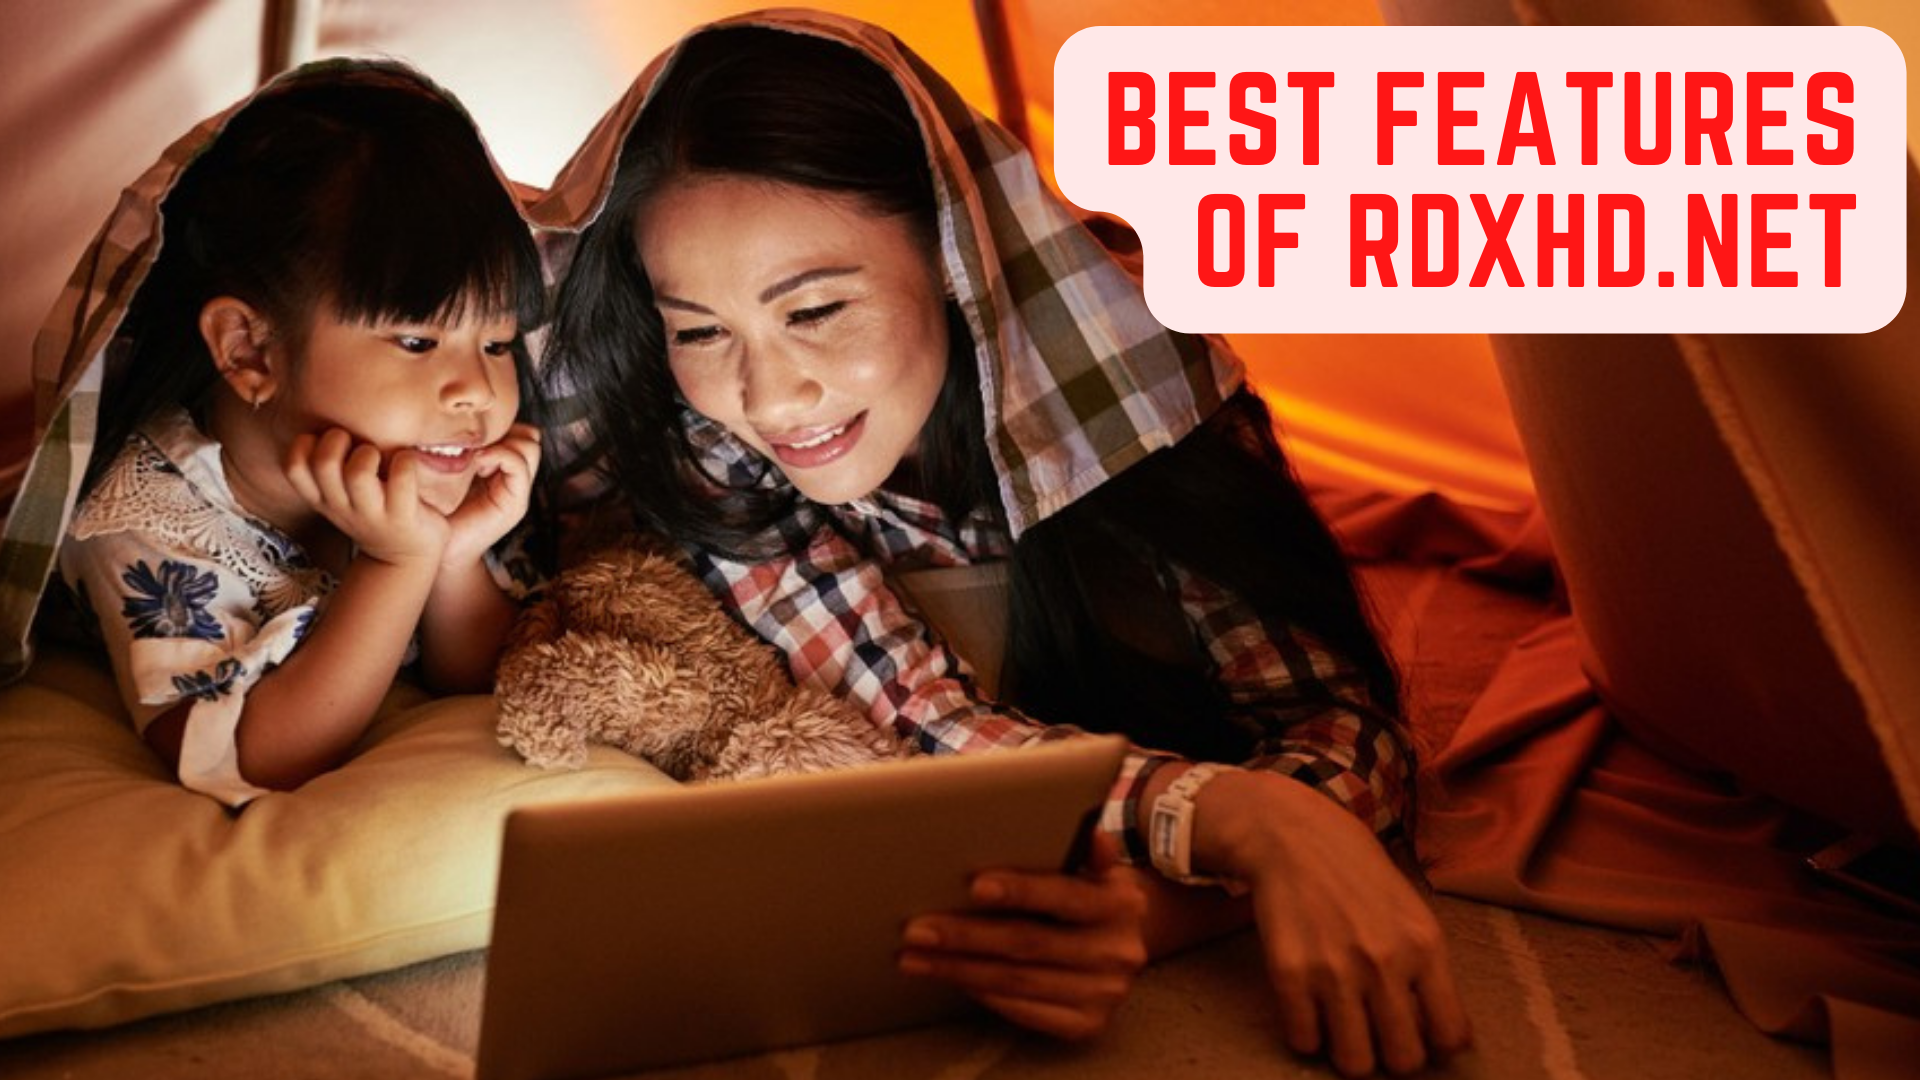 Two people watching movie from a tablet with words Best Features Of Rdxhd.net